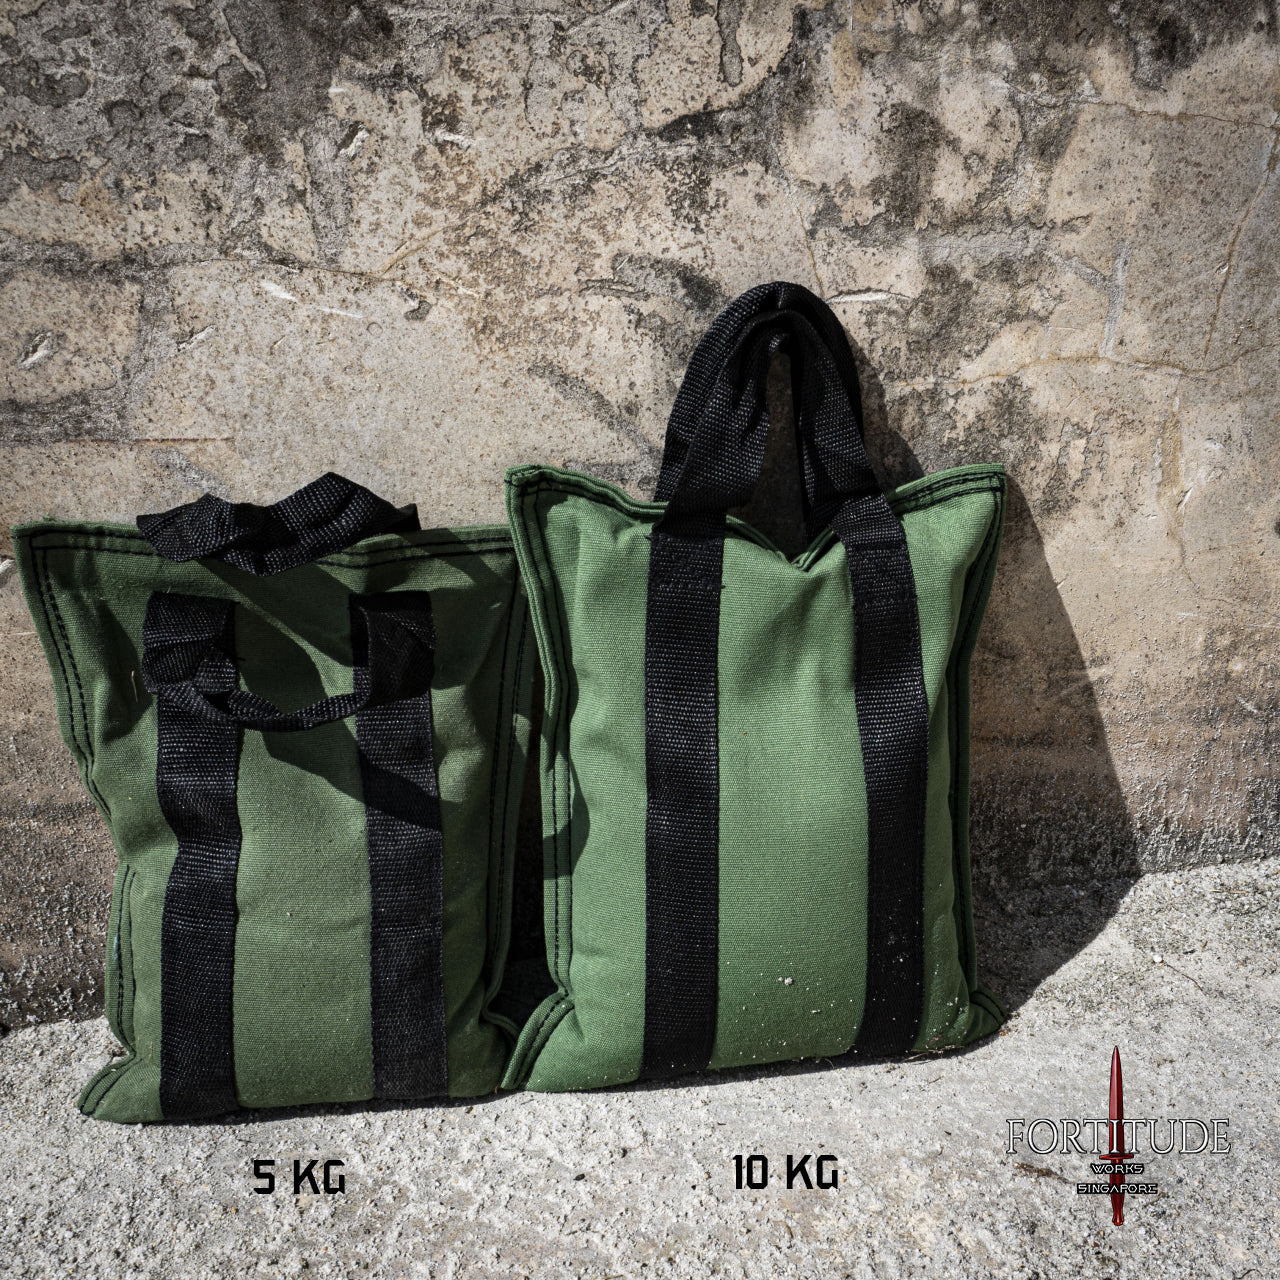 Crucible Ruck Weights - 10KG - FORTITUDE WORKS SINGAPORE